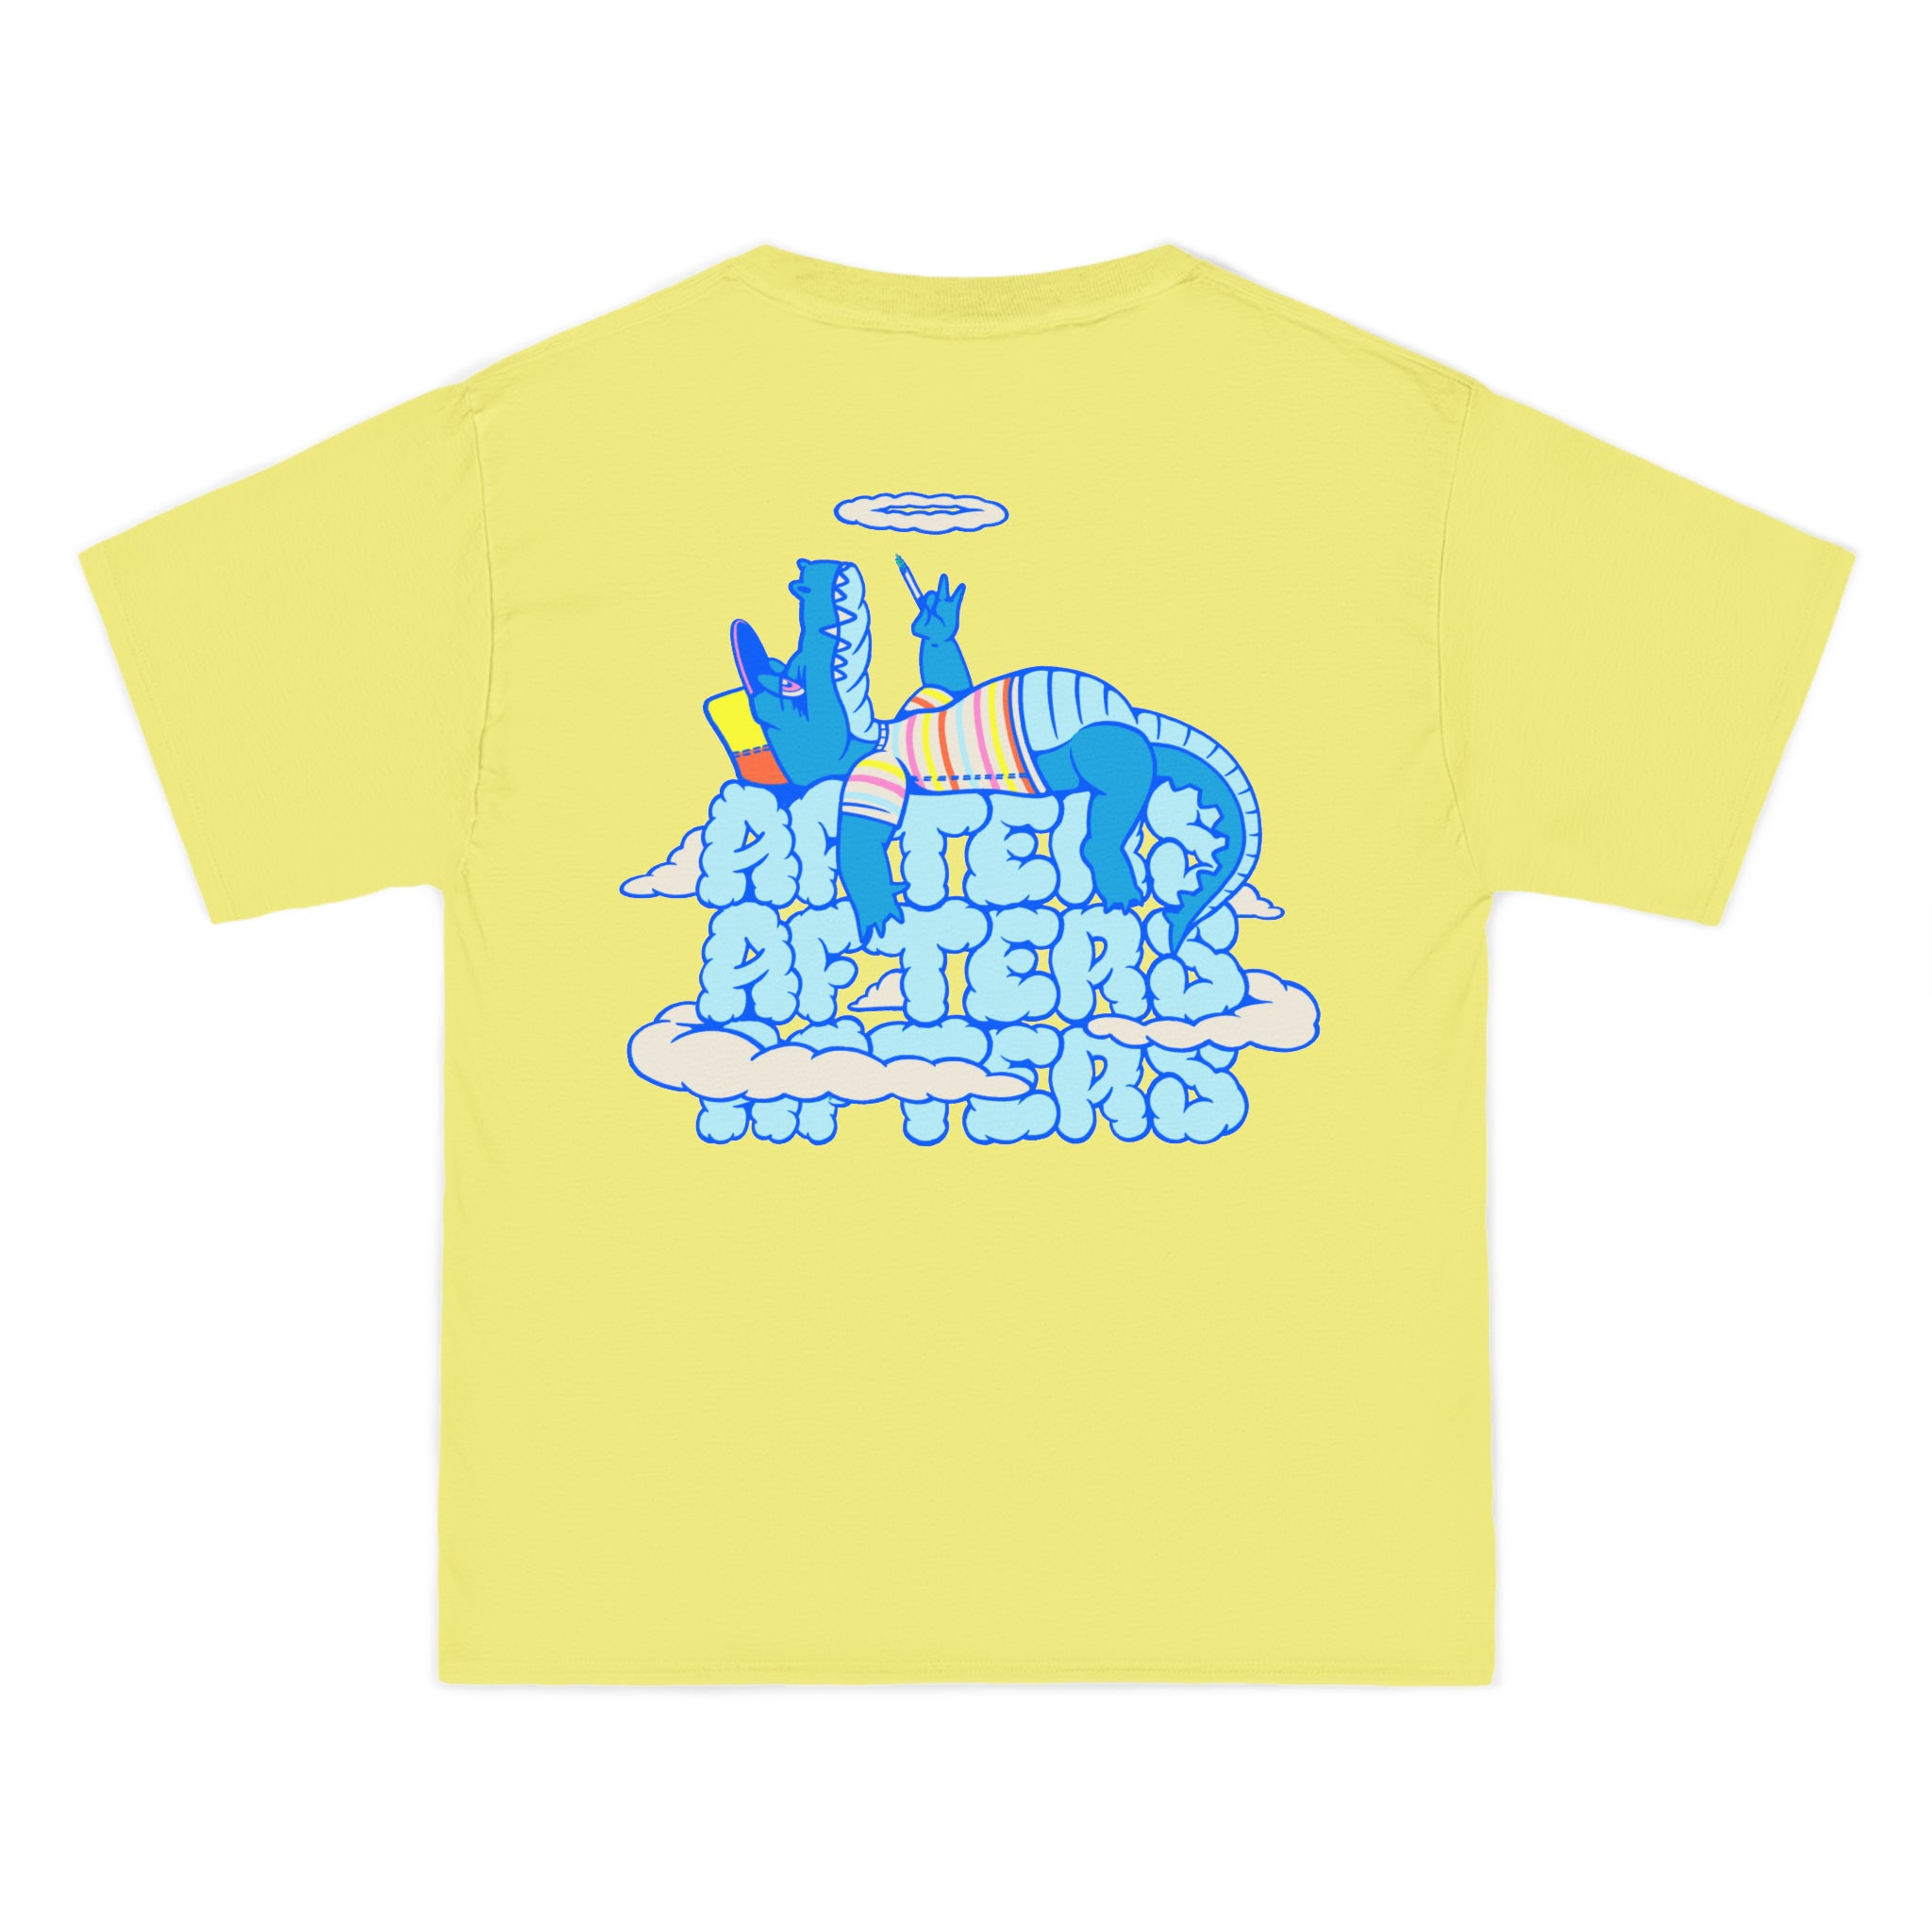 Afters³ Clouds Tee